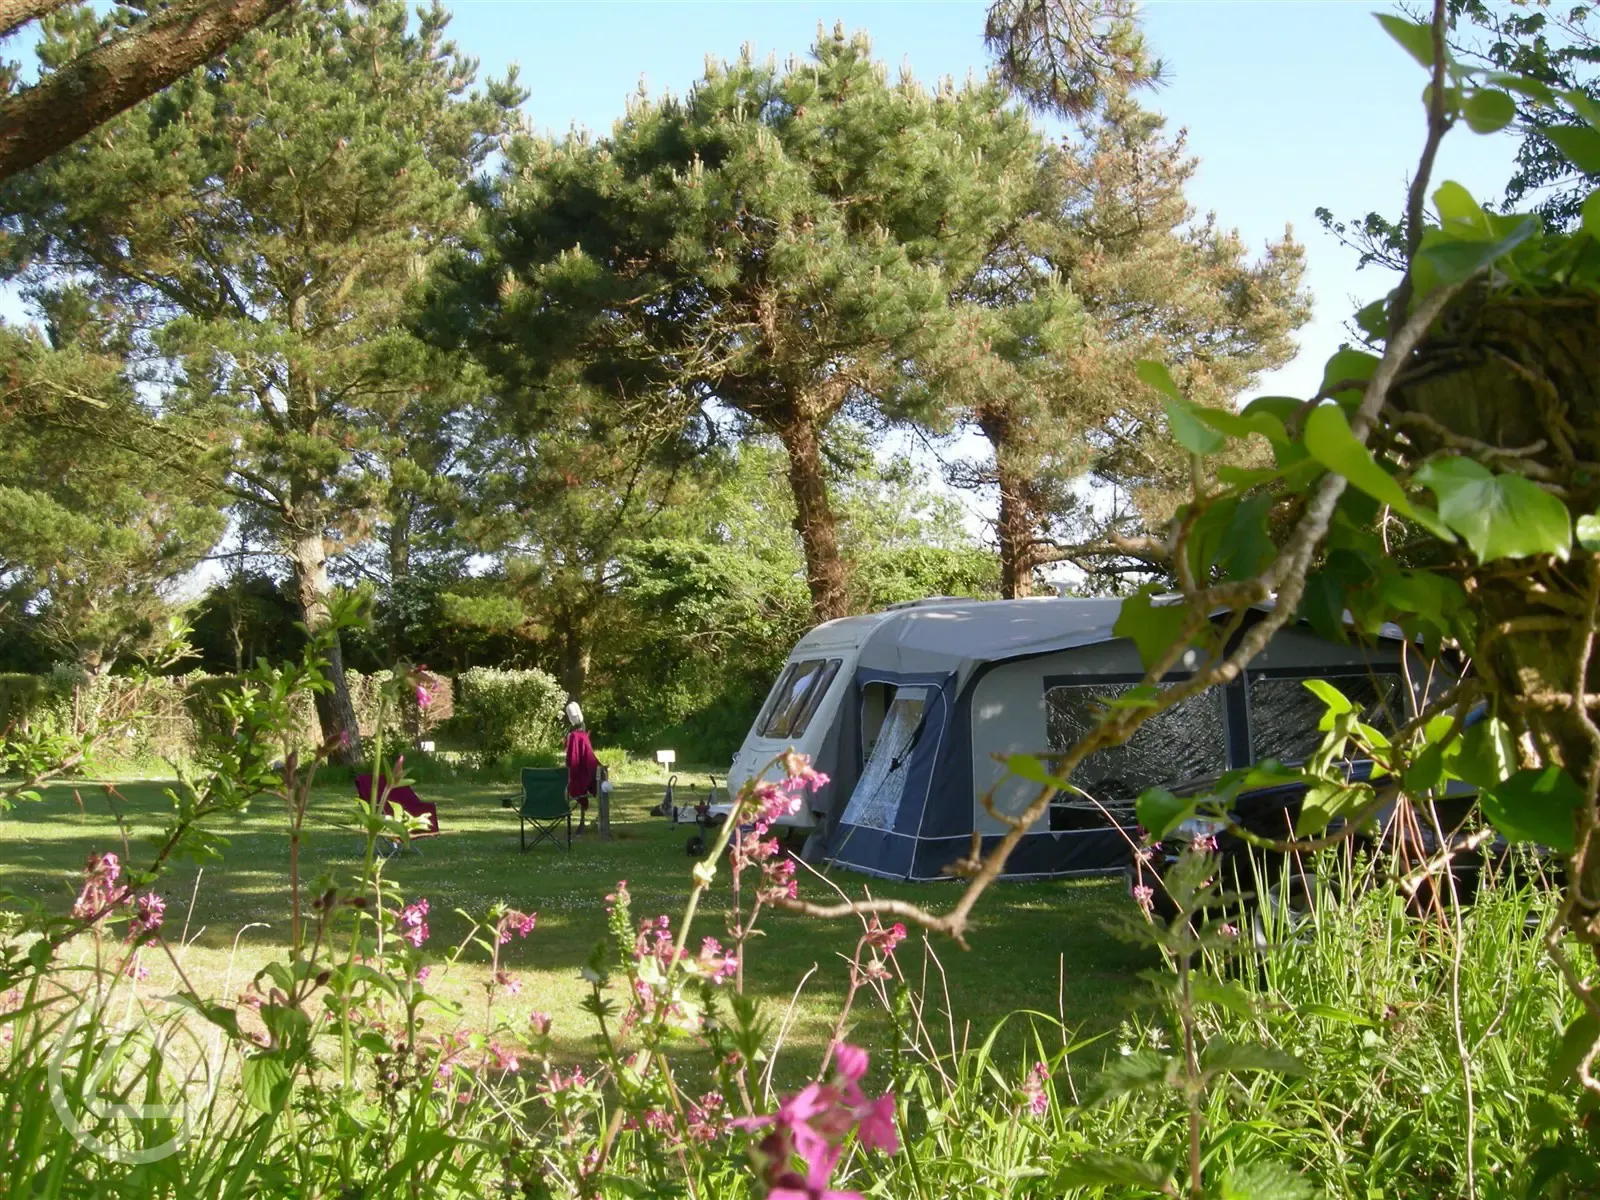 Serviced grass touring pitches